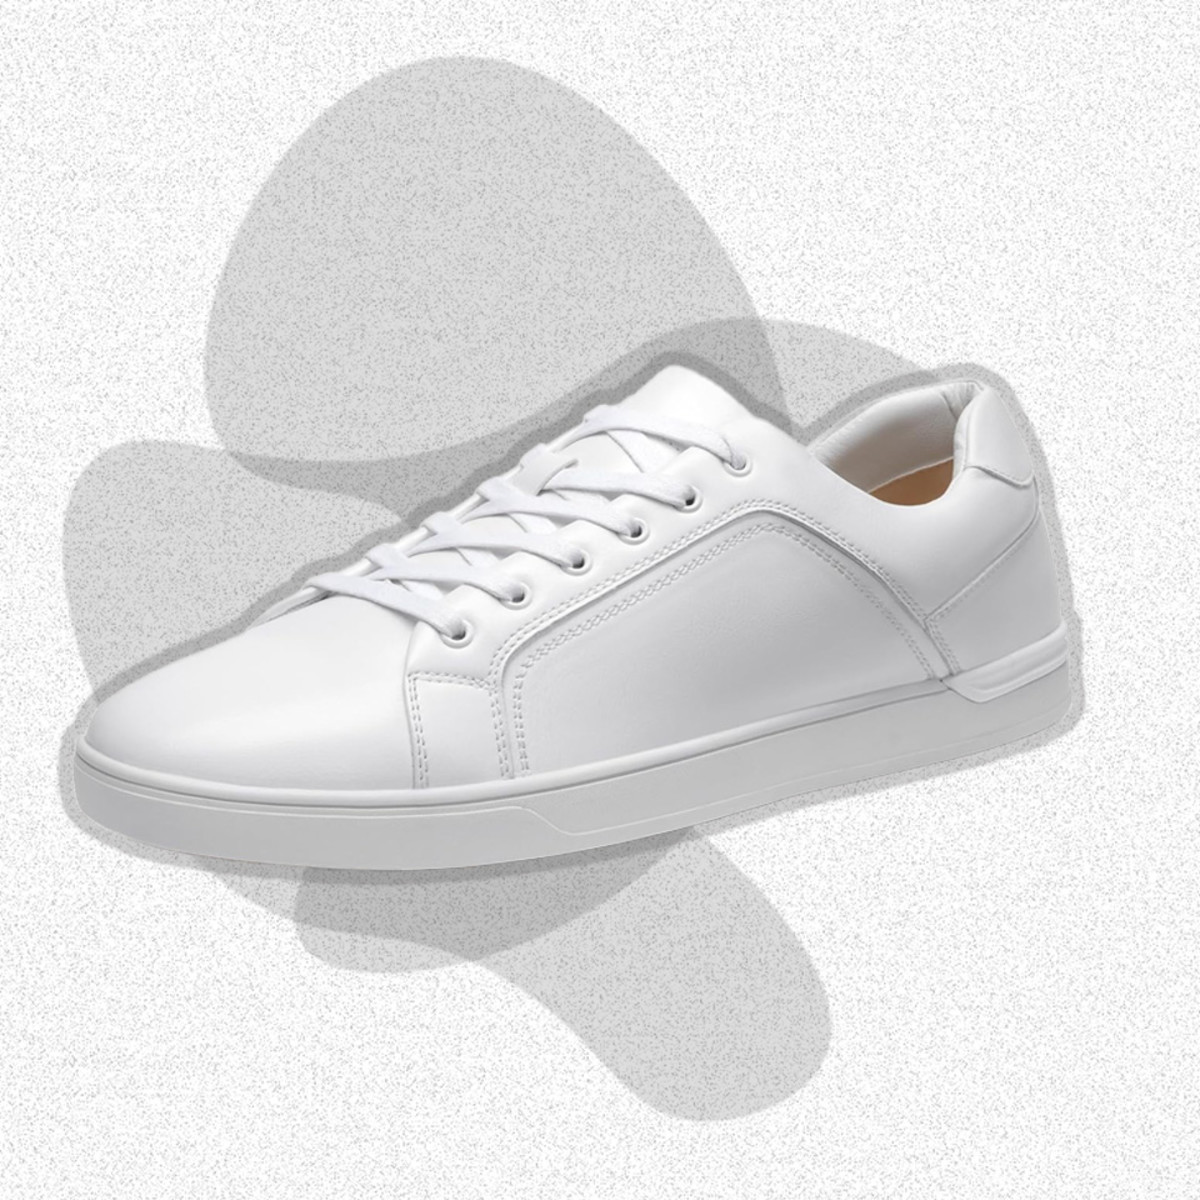 White Canvas Low Top Sneakers with Charcoal Dress Pants Outfits